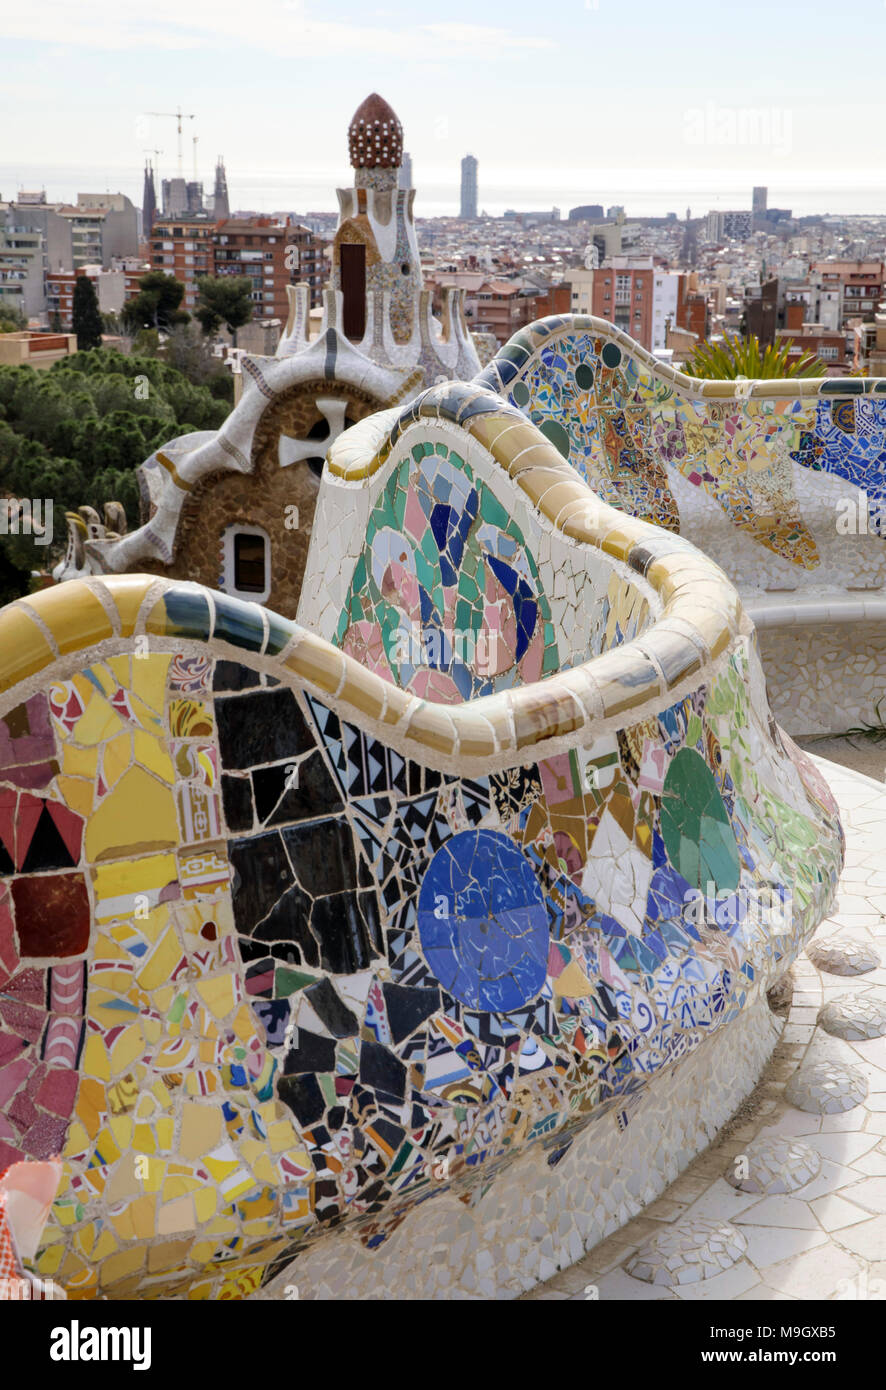 Park Guell, designed by famous Spanish architect Antoni Gaudi', is a major  attraction in Barcelona, Spain Stock Photo - Alamy